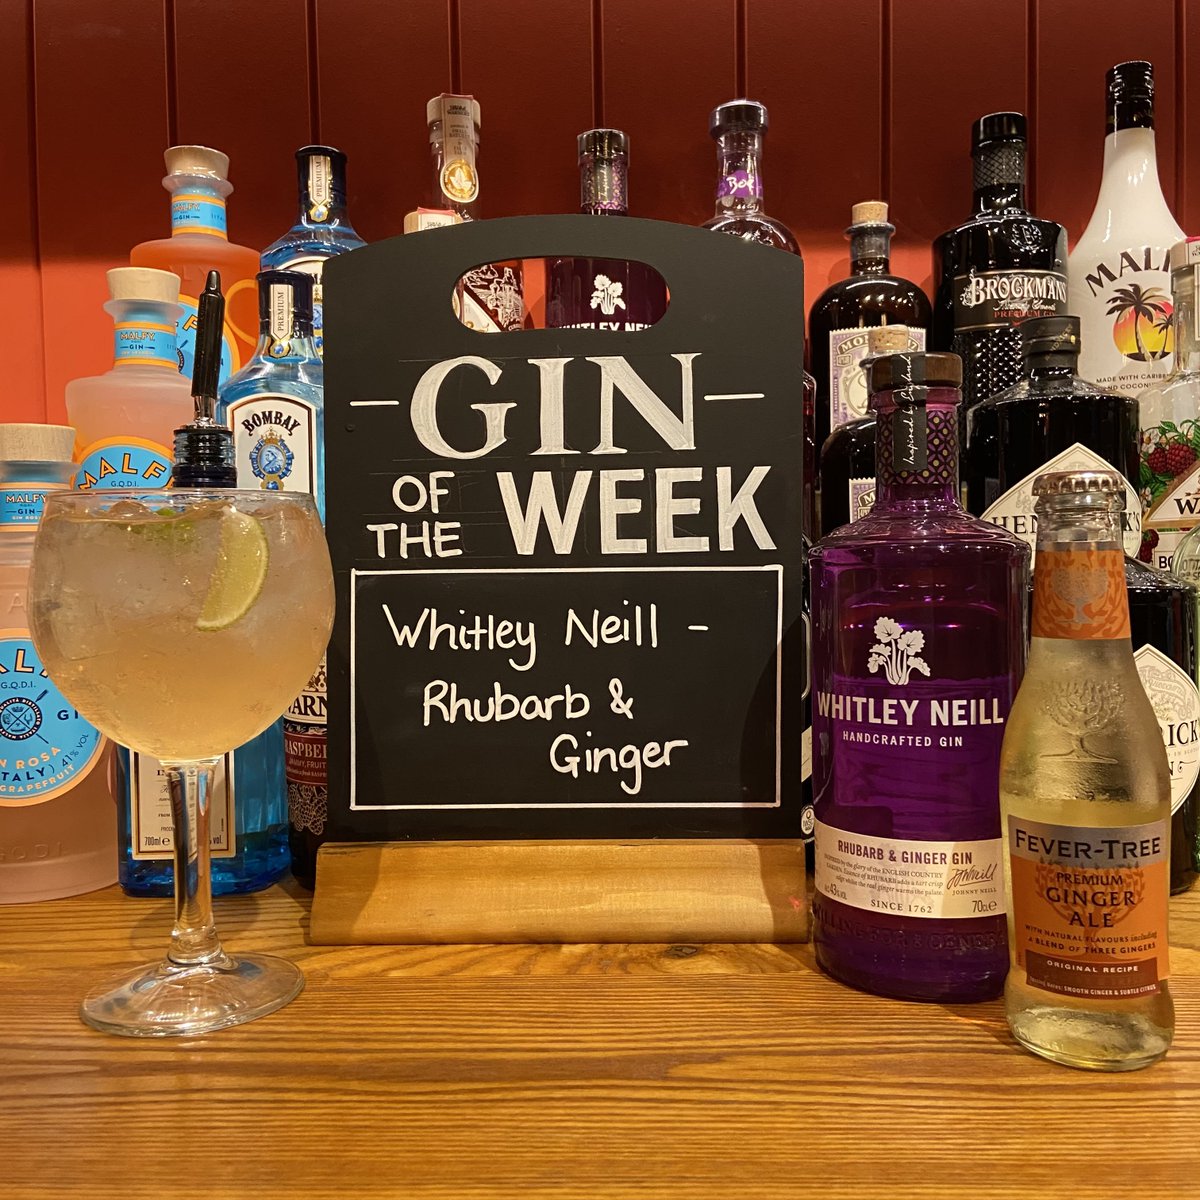 Our Gin of the Week is a personal favourite! @whitleyneillgin Rhubarb & Ginger is deliciously refreshing and goes amazingly with @fevertreemixers Ginger Ale !! 

#poppysginoftheweek #whitleyneillgin #fevertreemixers #ginandtonic #ginandgingerale #ginoftheweek #spiritsandmixers